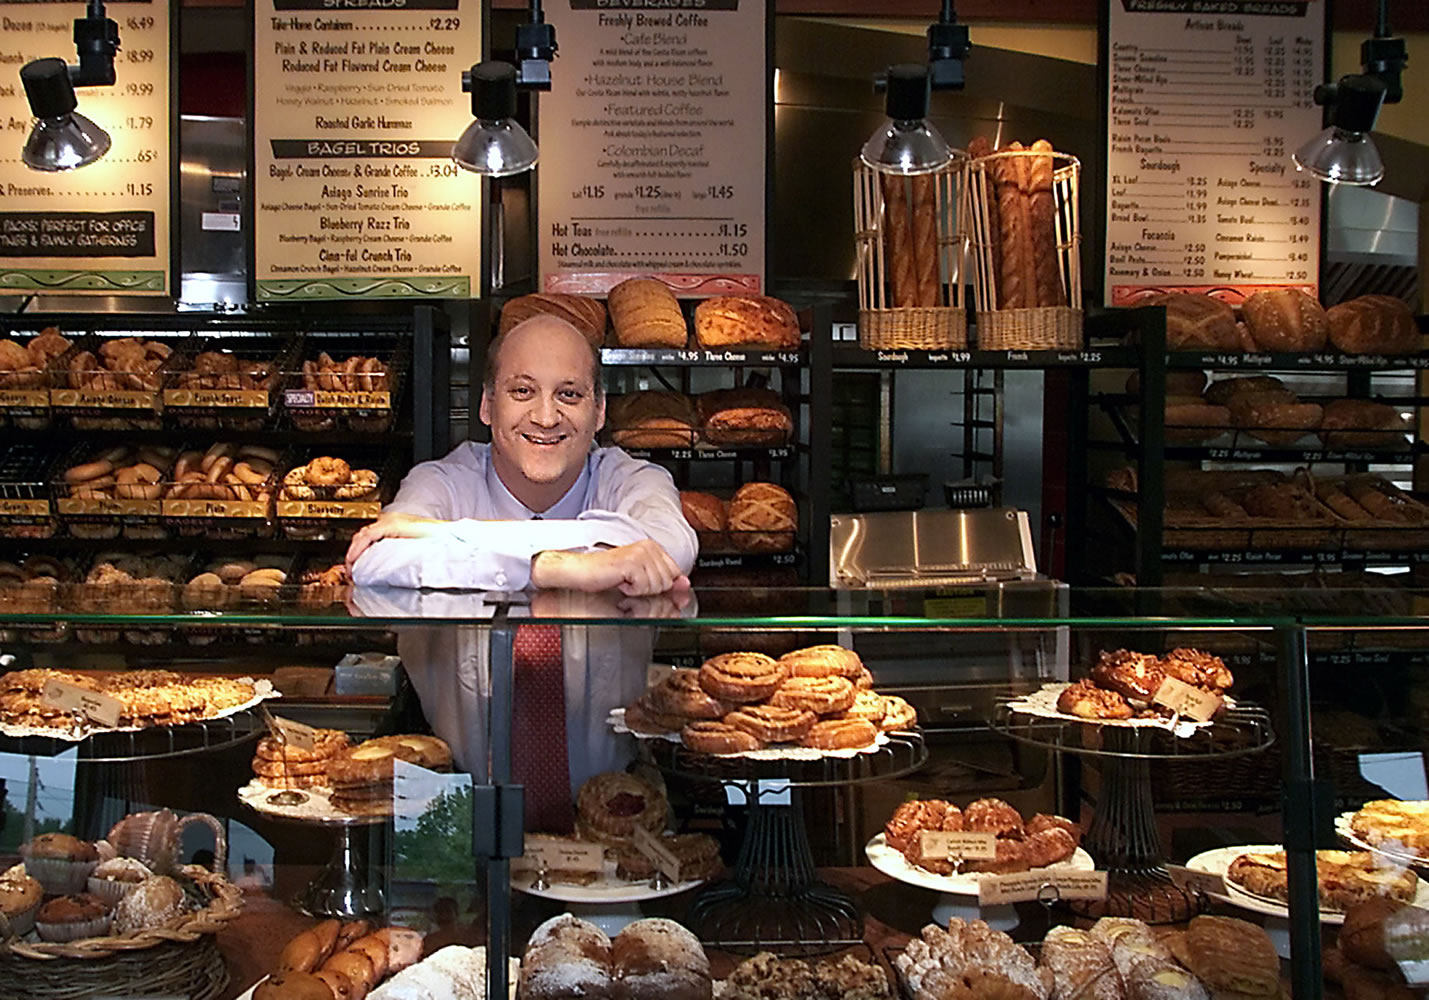 Panera Bread Co. CEO Ron Shaich stands behind a counter at a location in St. Louis.